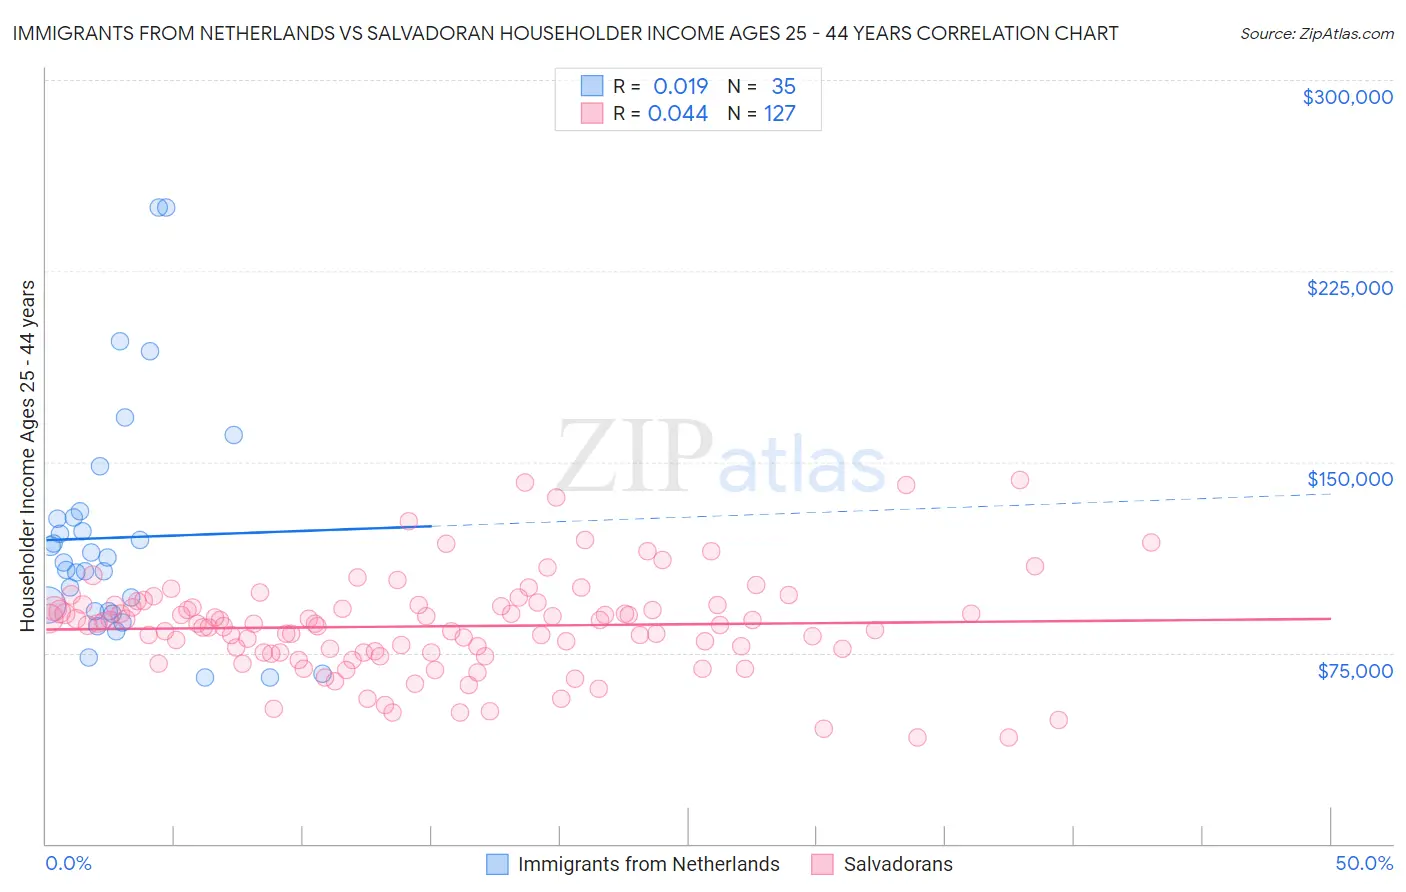 Immigrants from Netherlands vs Salvadoran Householder Income Ages 25 - 44 years